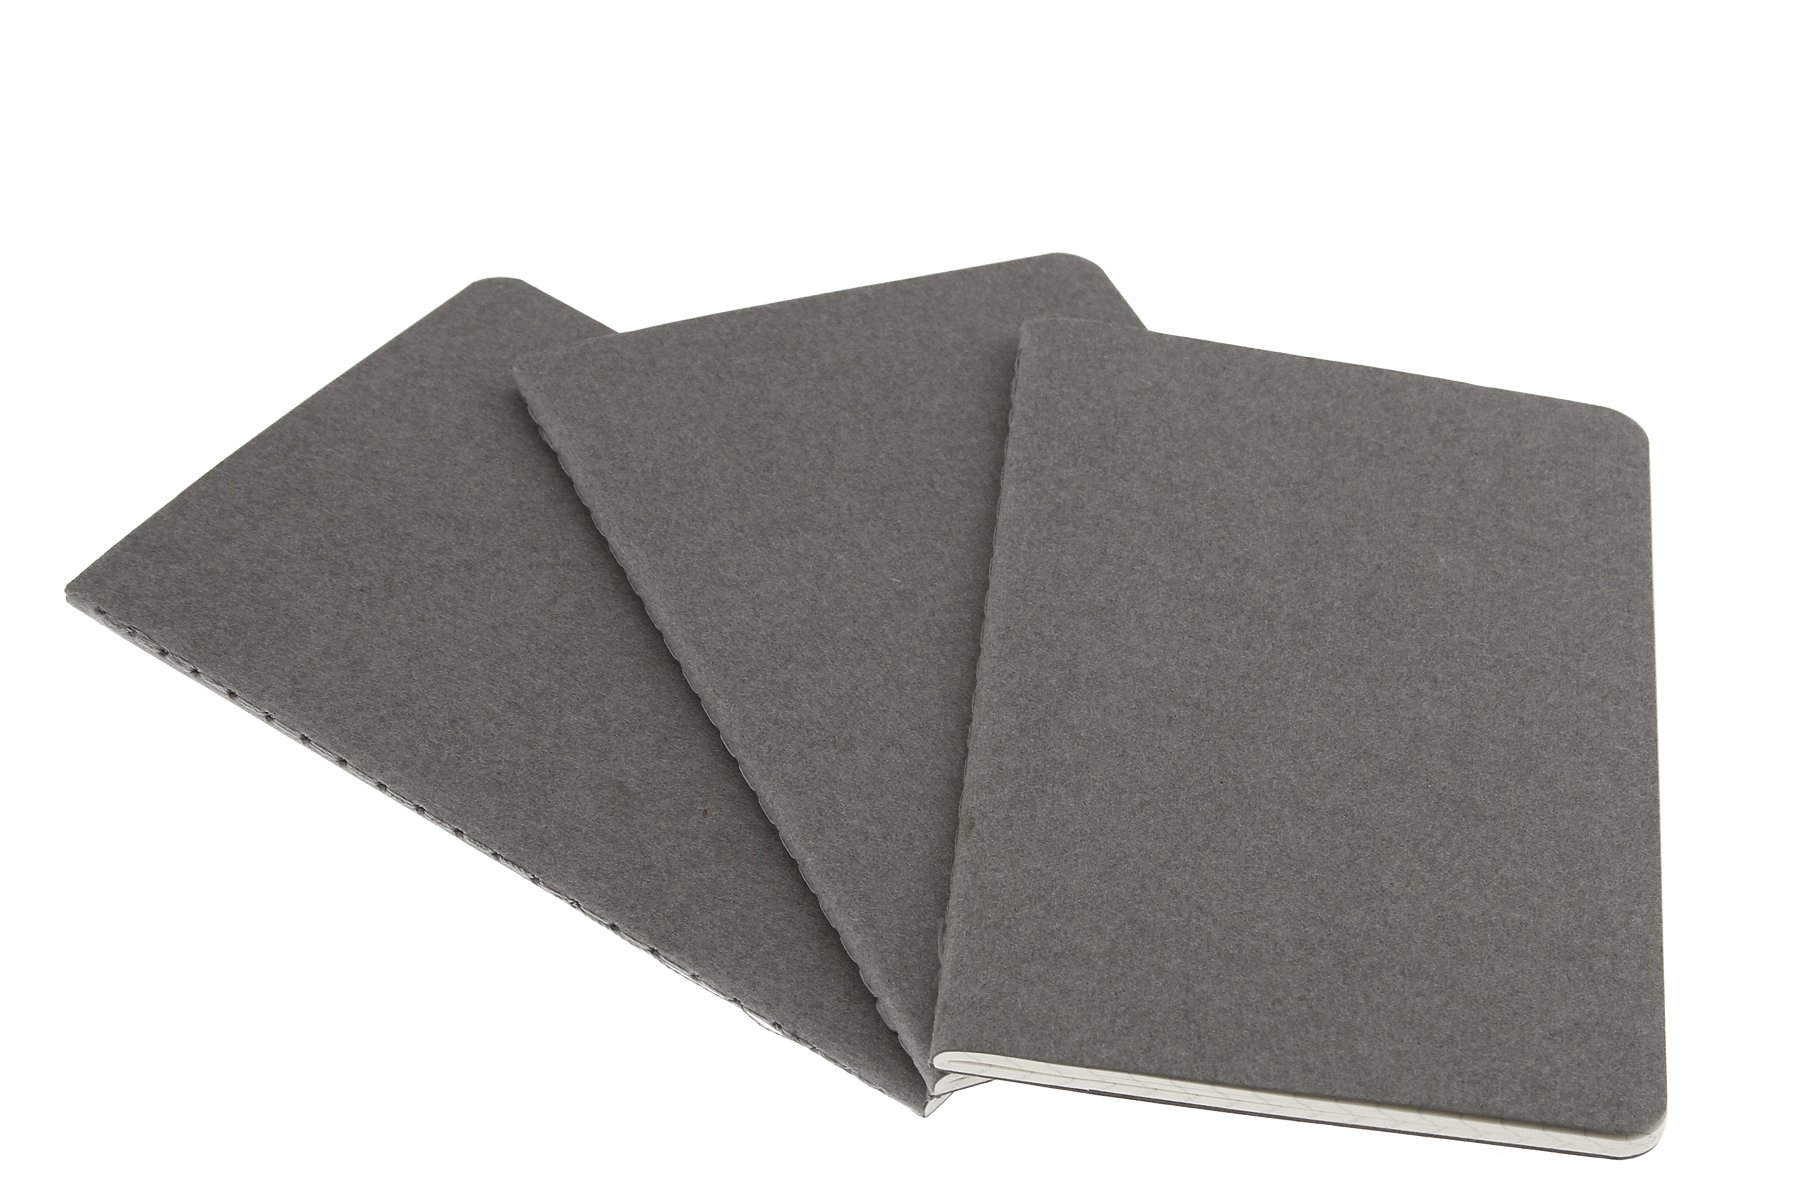 Moleskine cahier notebooks (3) - perfect for the Passport!